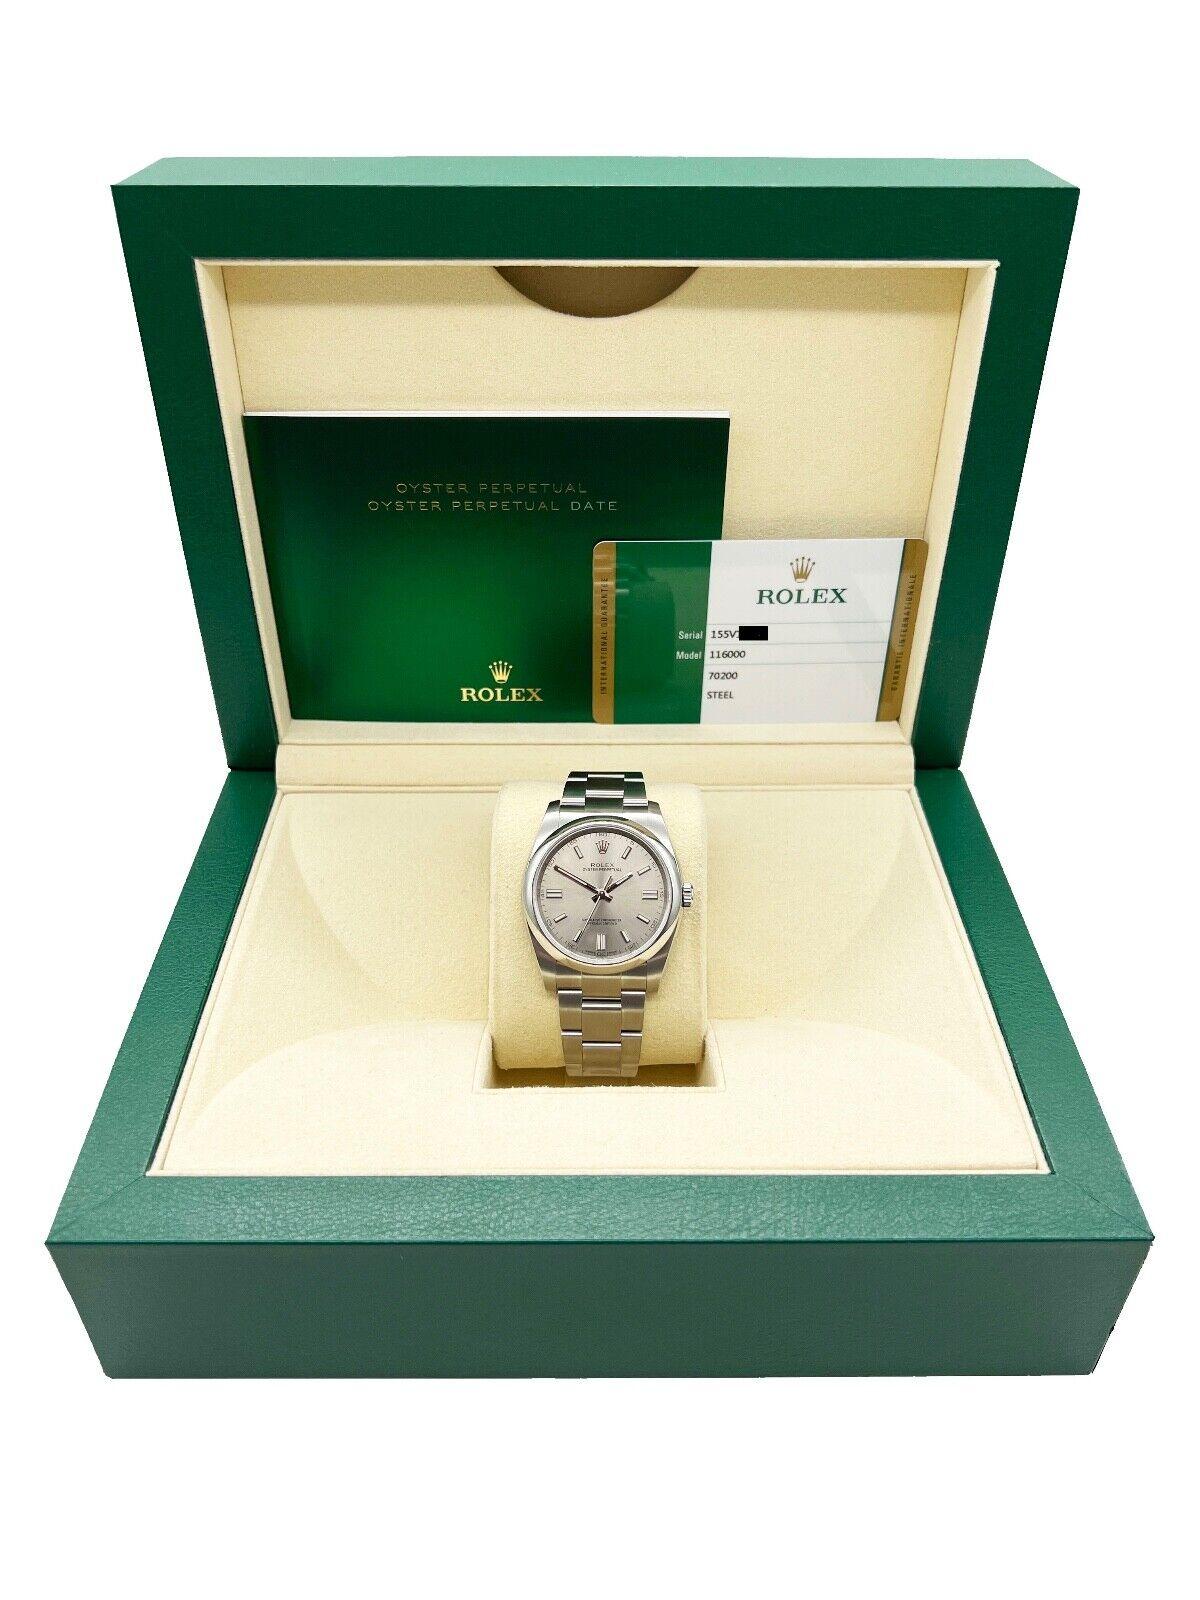 Rolex Oyster Perpetual 116000 36mm Silver Dial Stainless Steel Box Papers In Excellent Condition For Sale In San Diego, CA